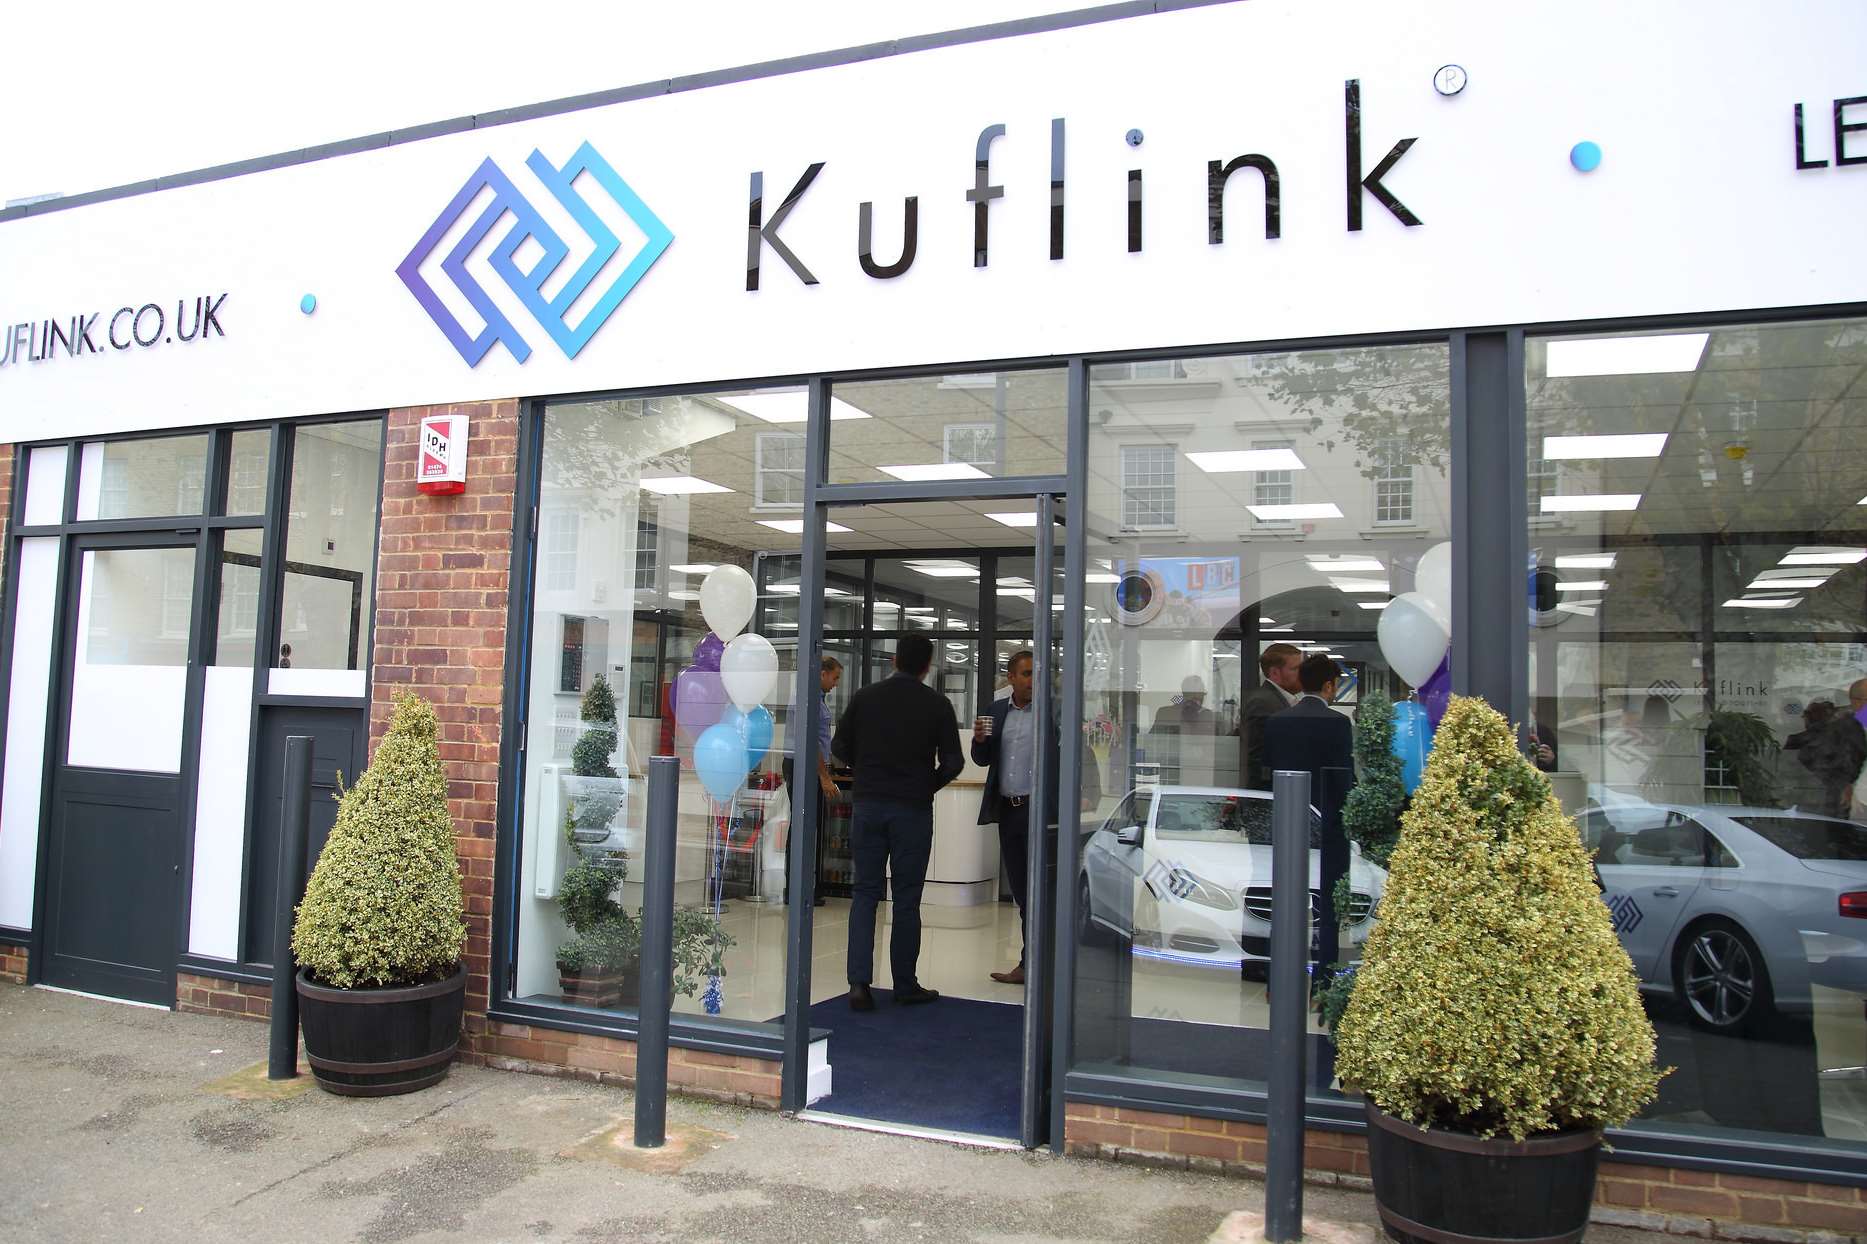 The Kuflink office is on the former Blockbuster site